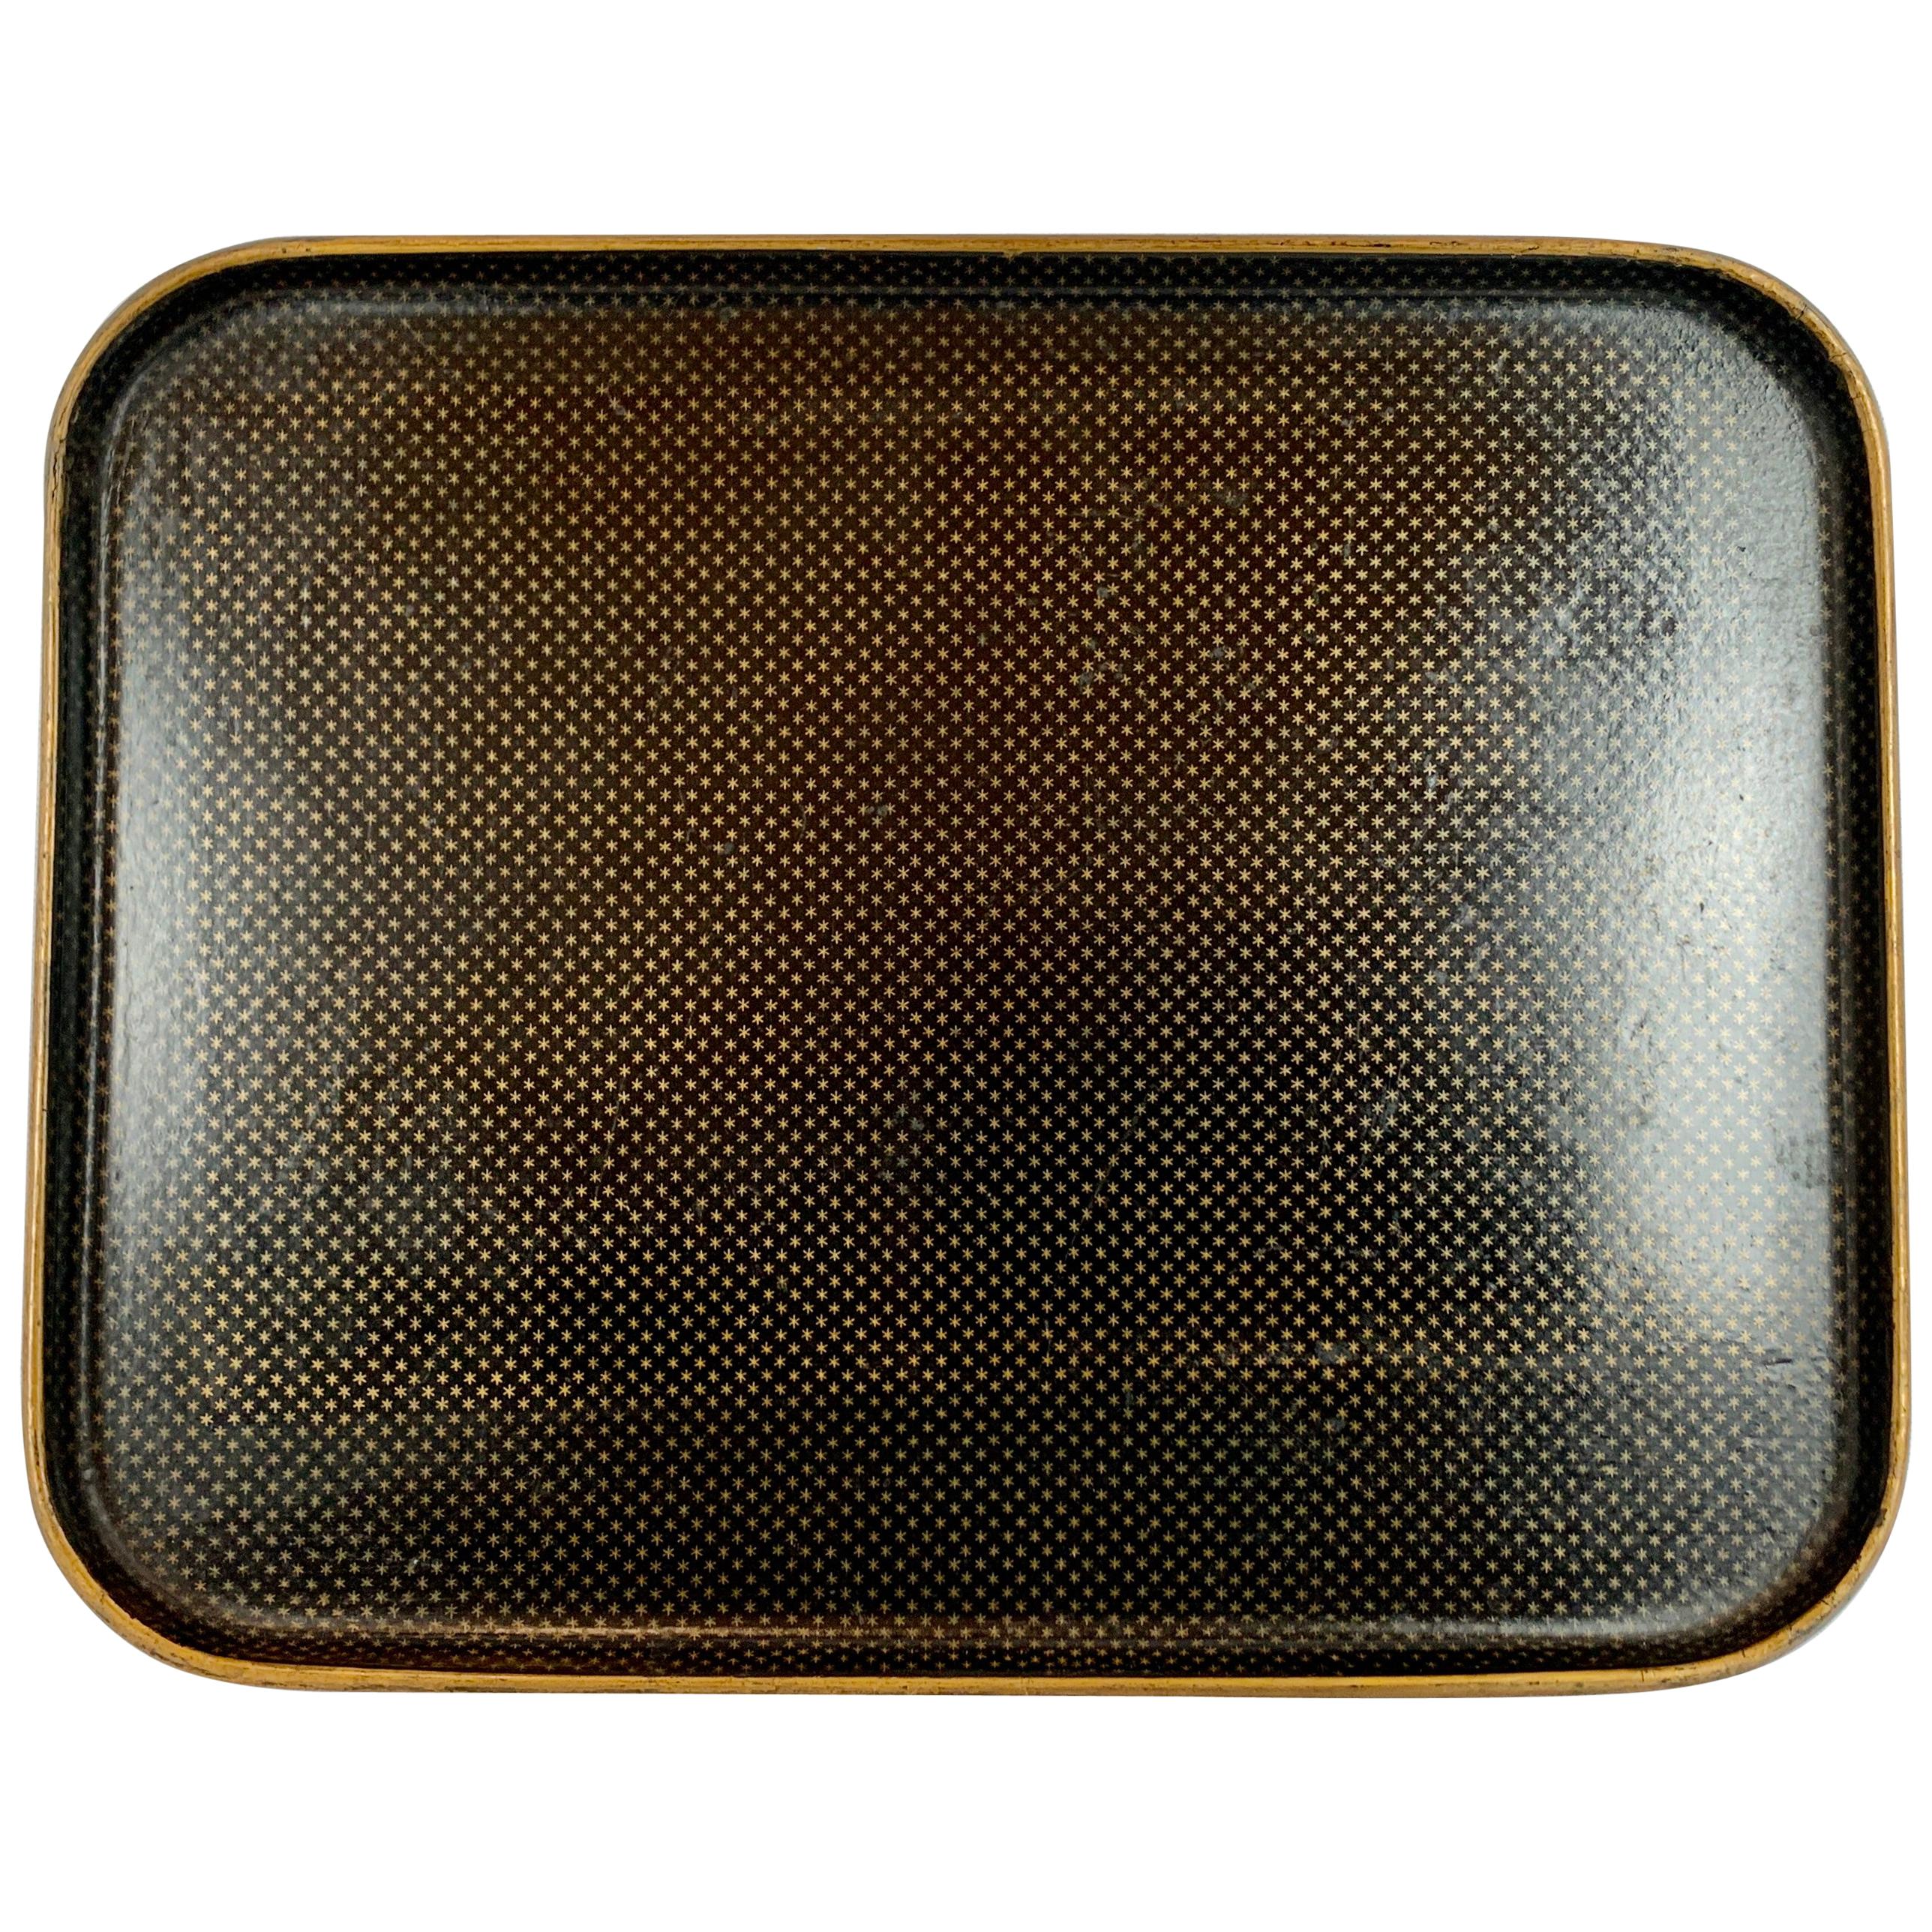 Cushion Shaped Papier Mache Tray-Gold Star Pattern-Napoleon III Period, France